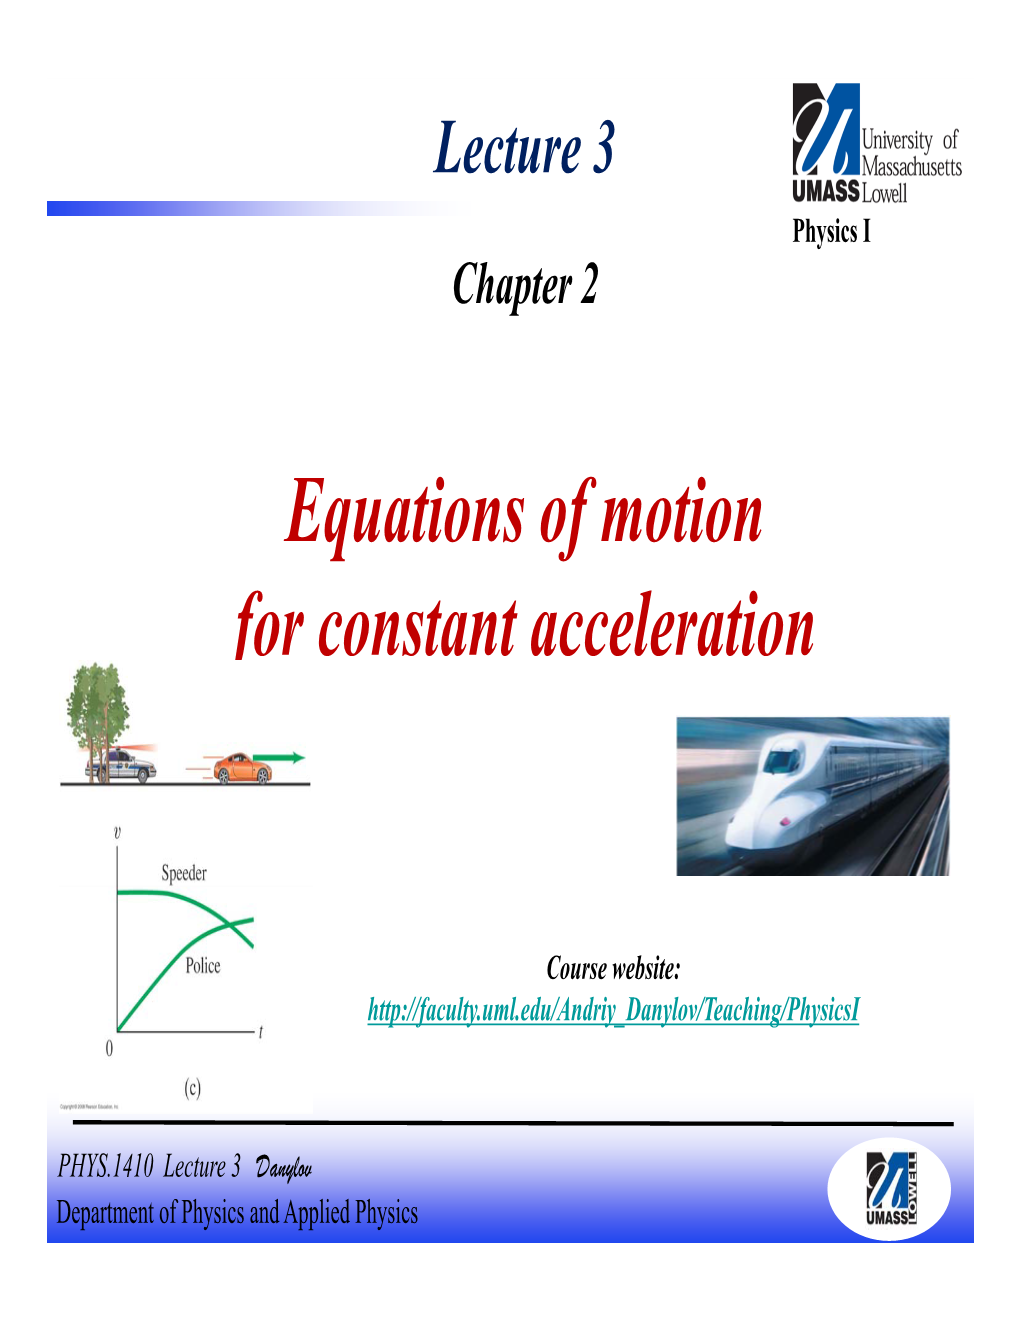 Equations of Motion for Constant Acceleration